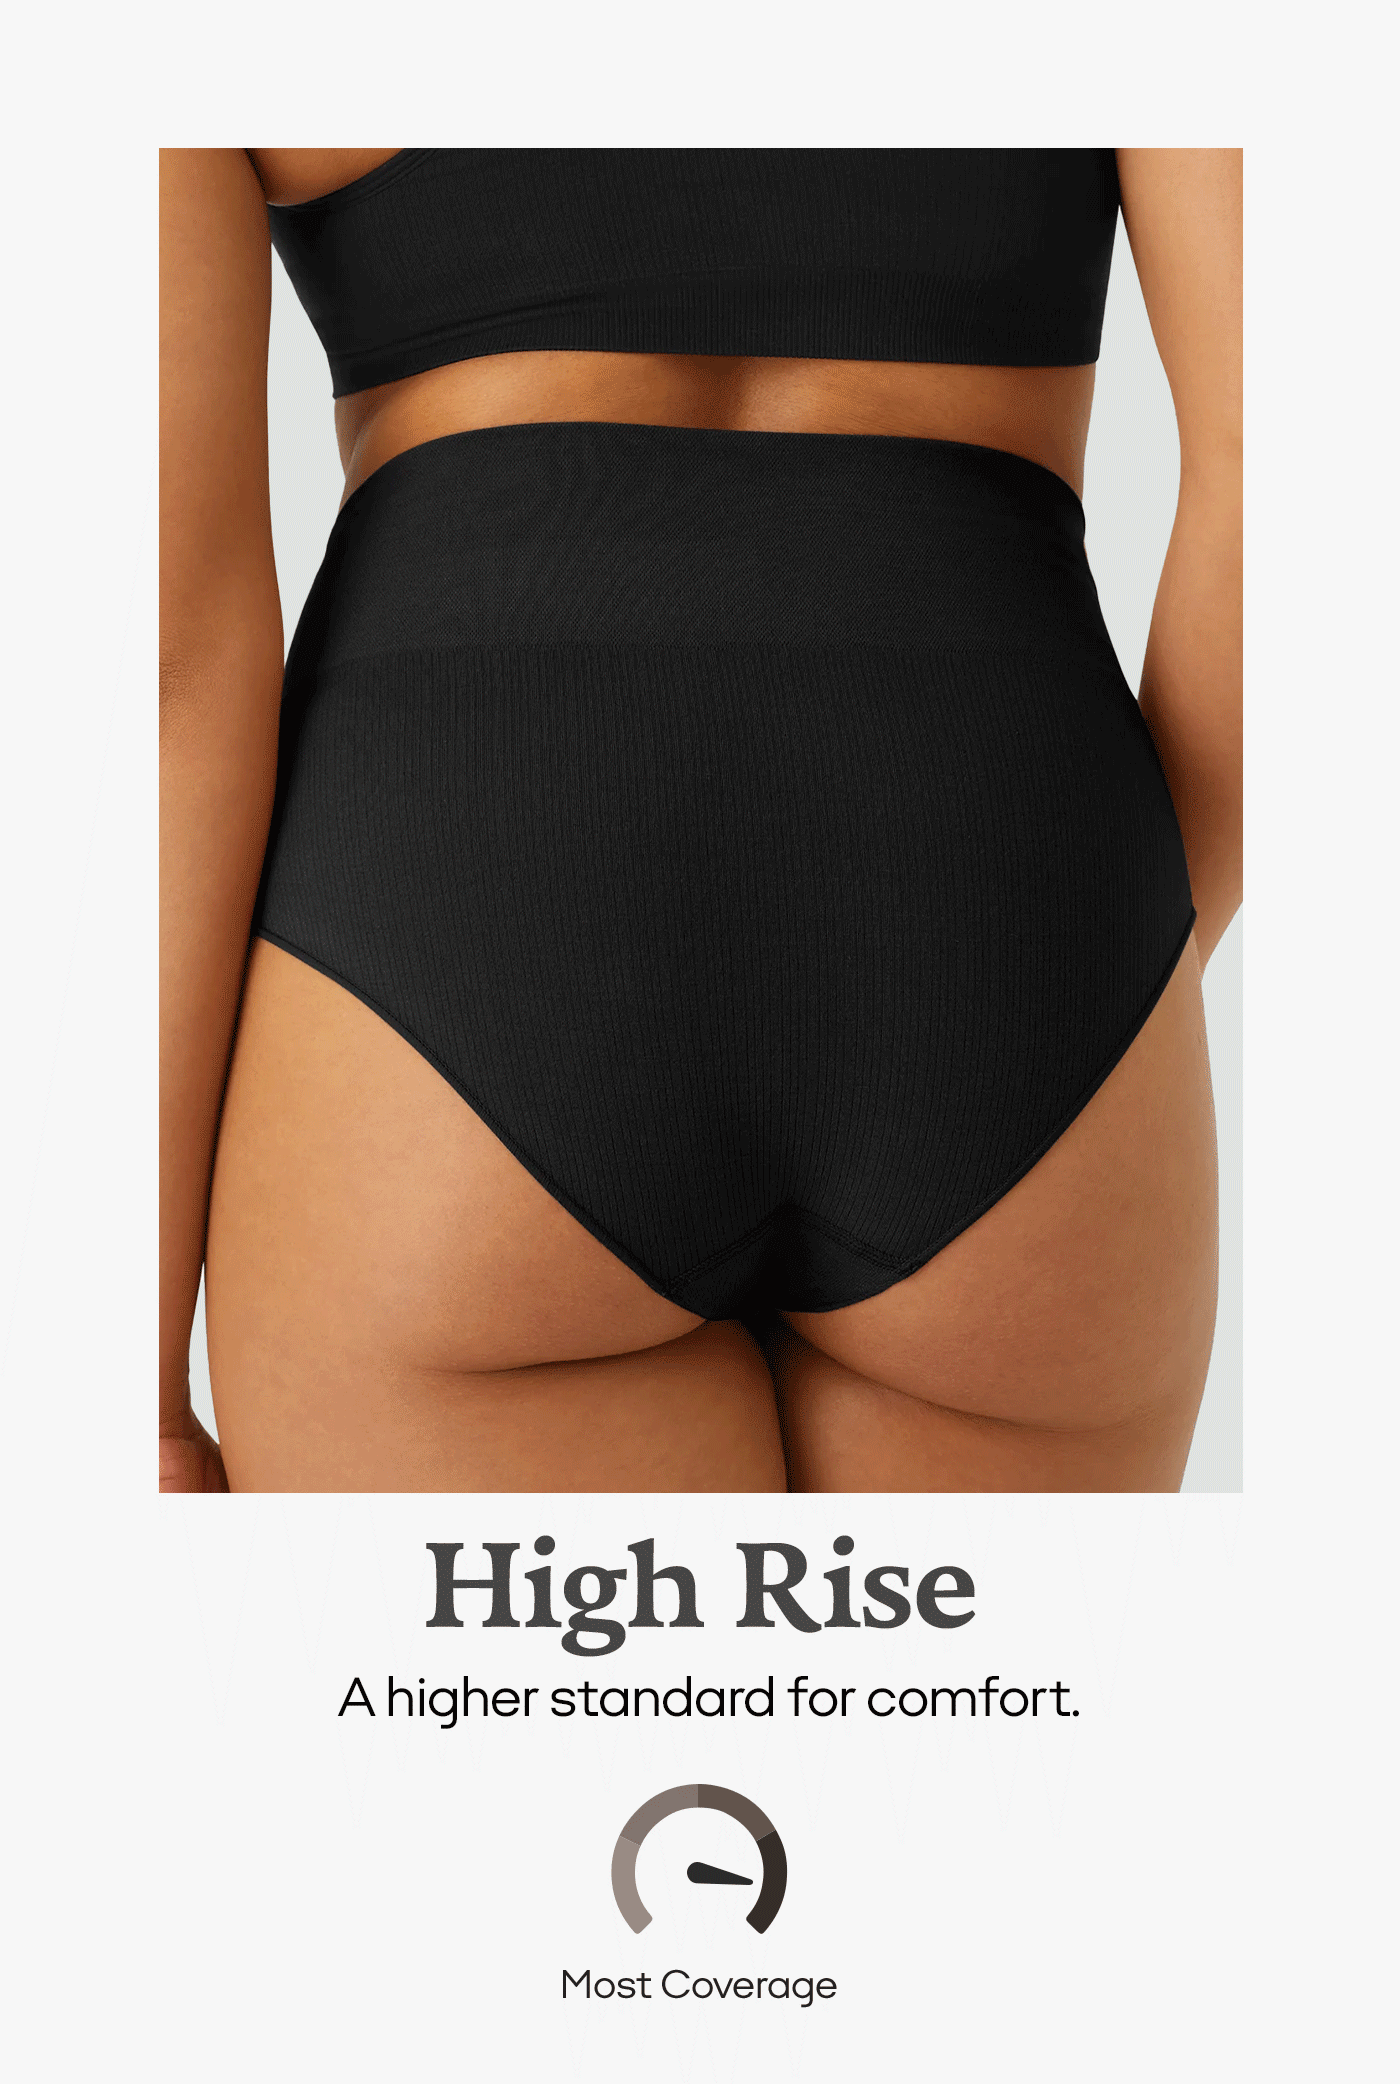 High Rise | A higher standard for comfort. Most Coverage